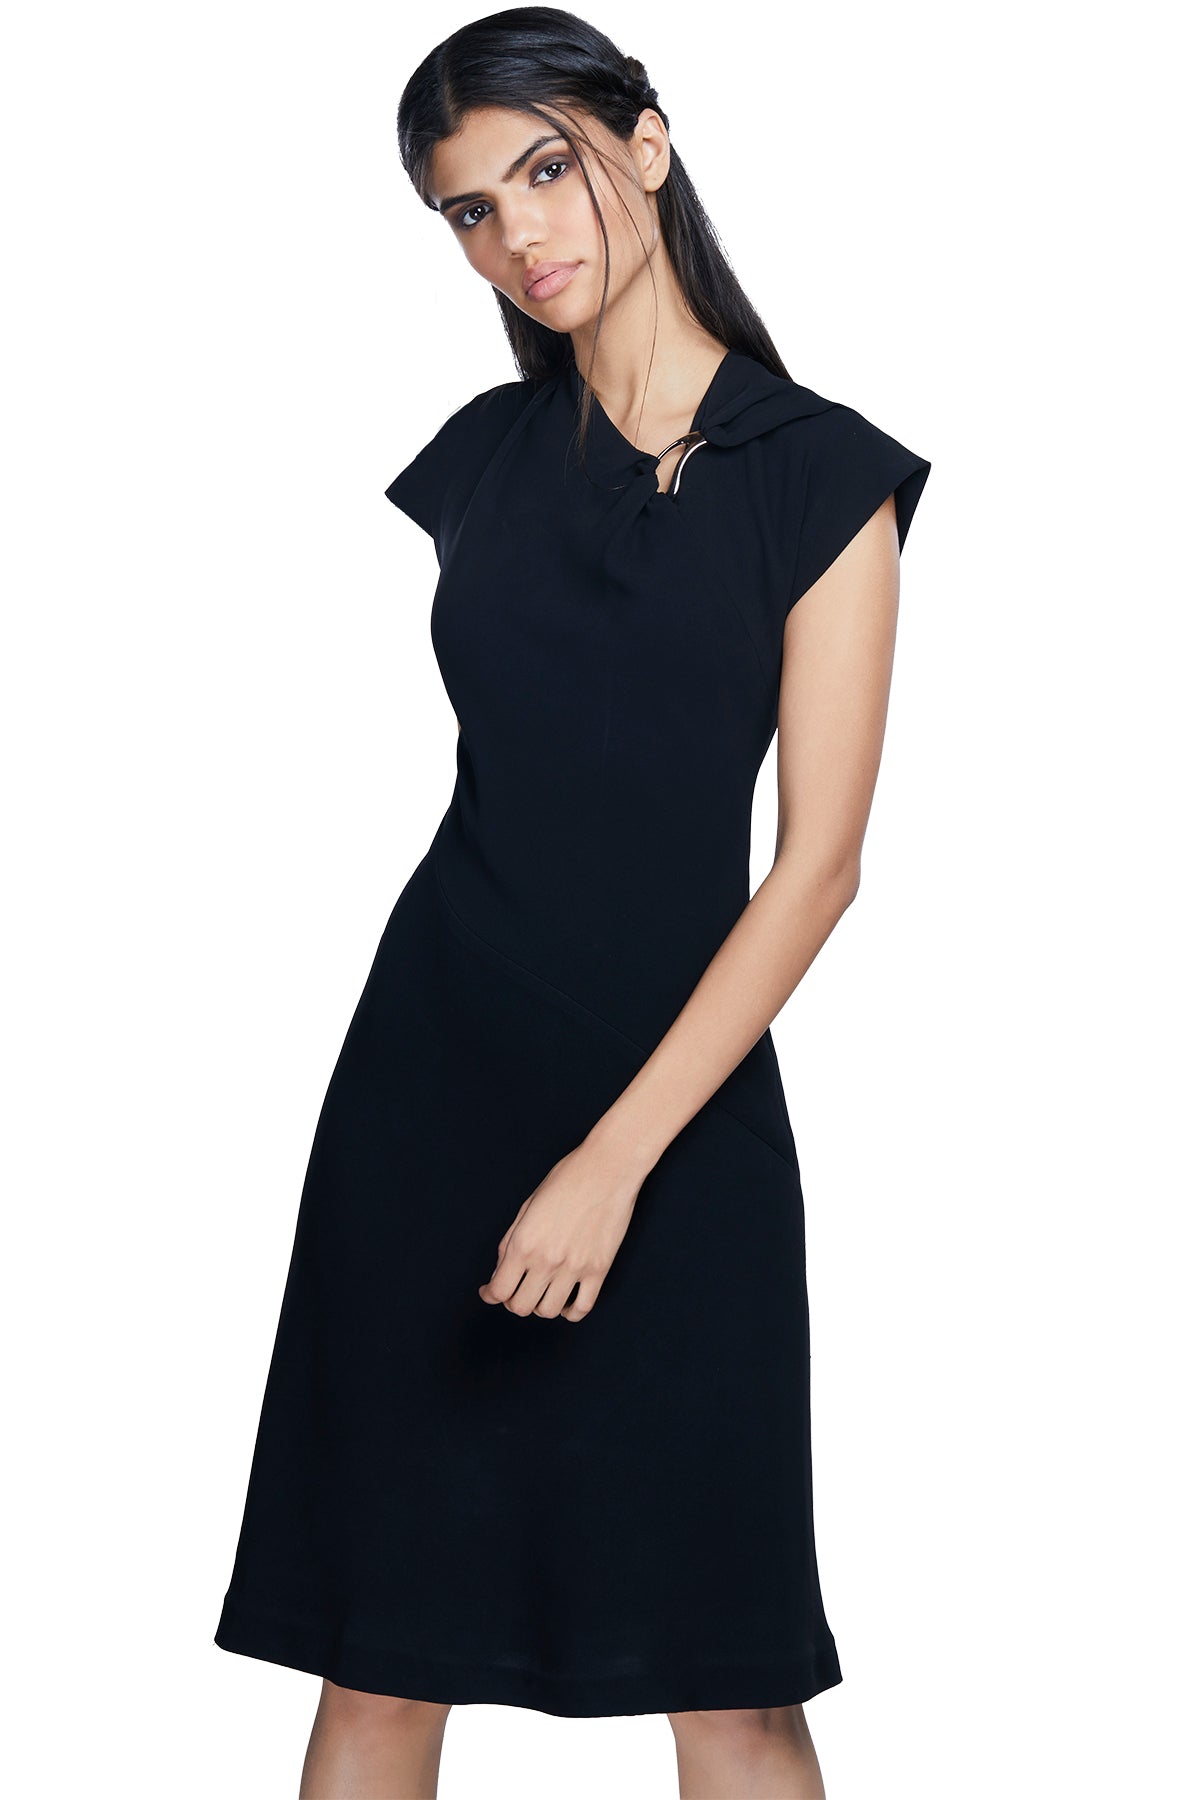 Because sophisticated and simple is the new sexy! Get your hands on our statement black dress - ideal for any occasion from being the boss in that board room to the diva in that ball room. 